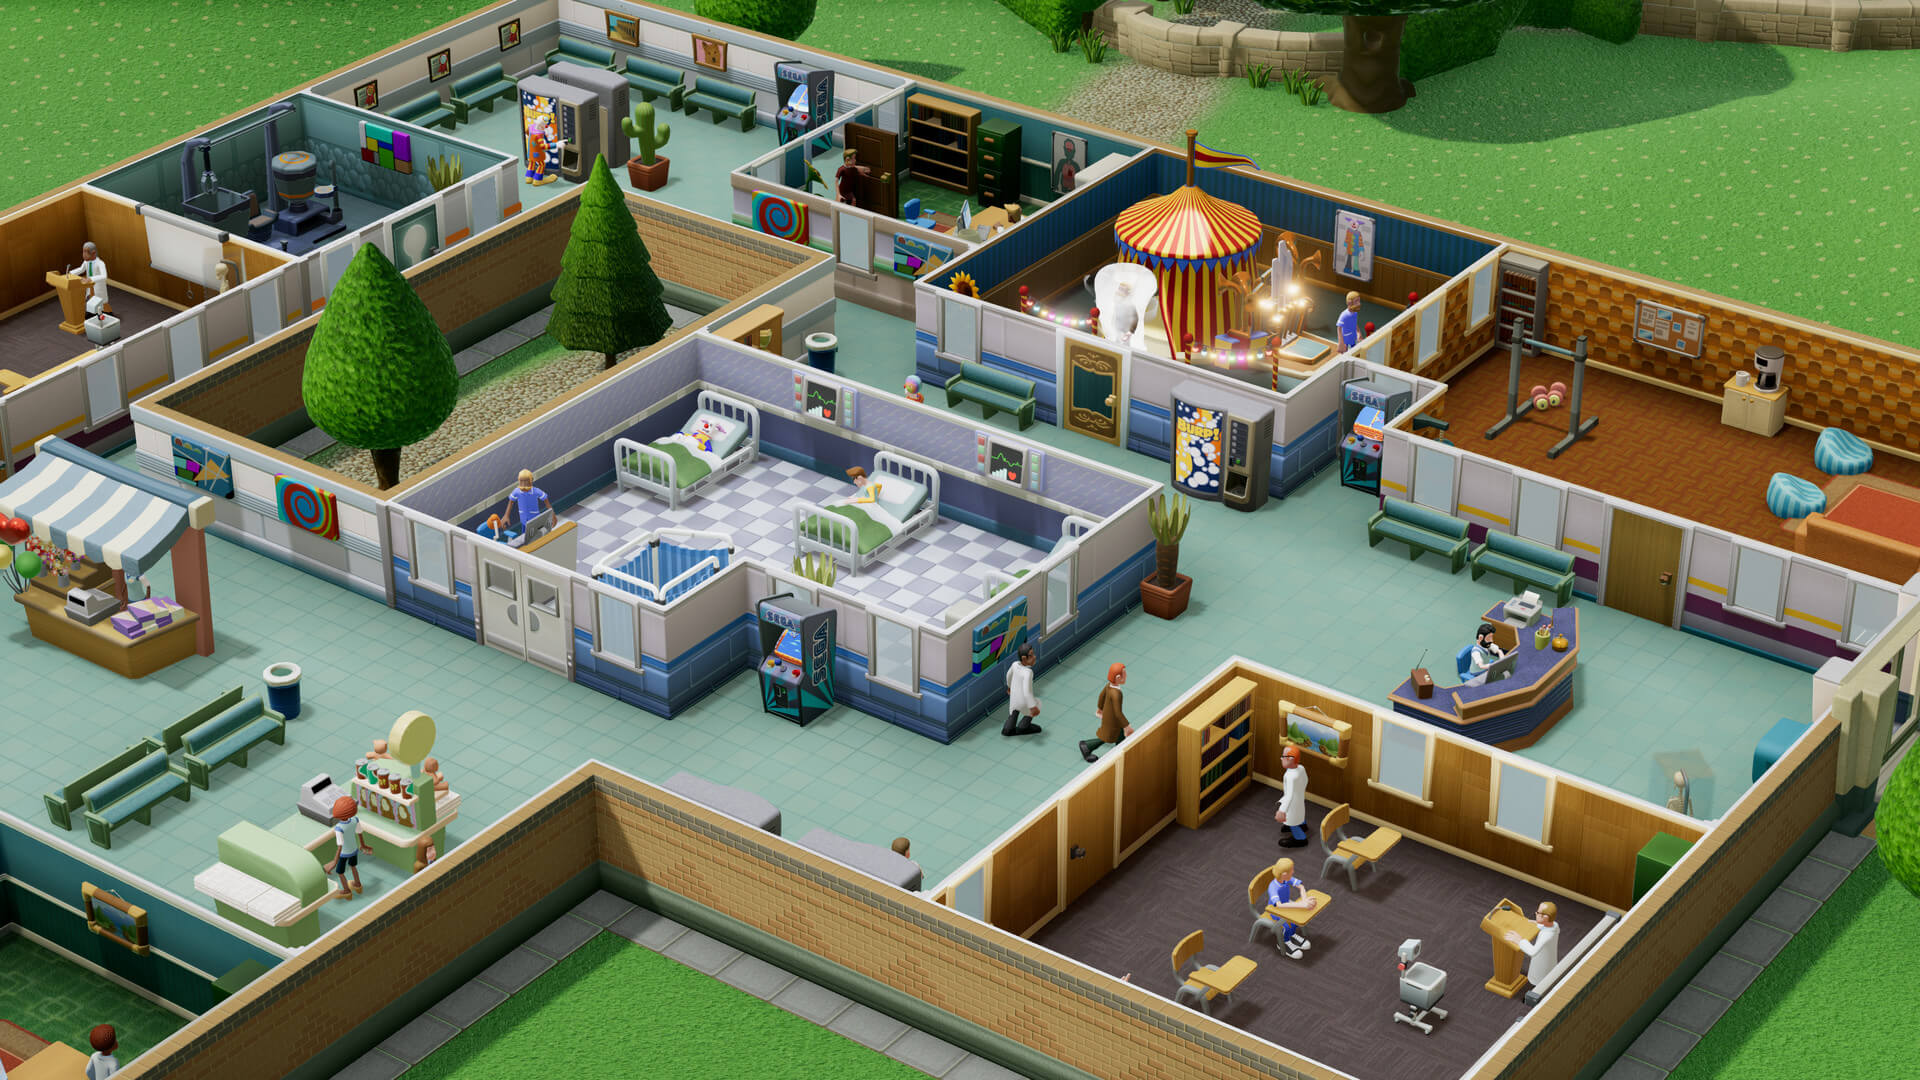 free download games similar to two point hospital